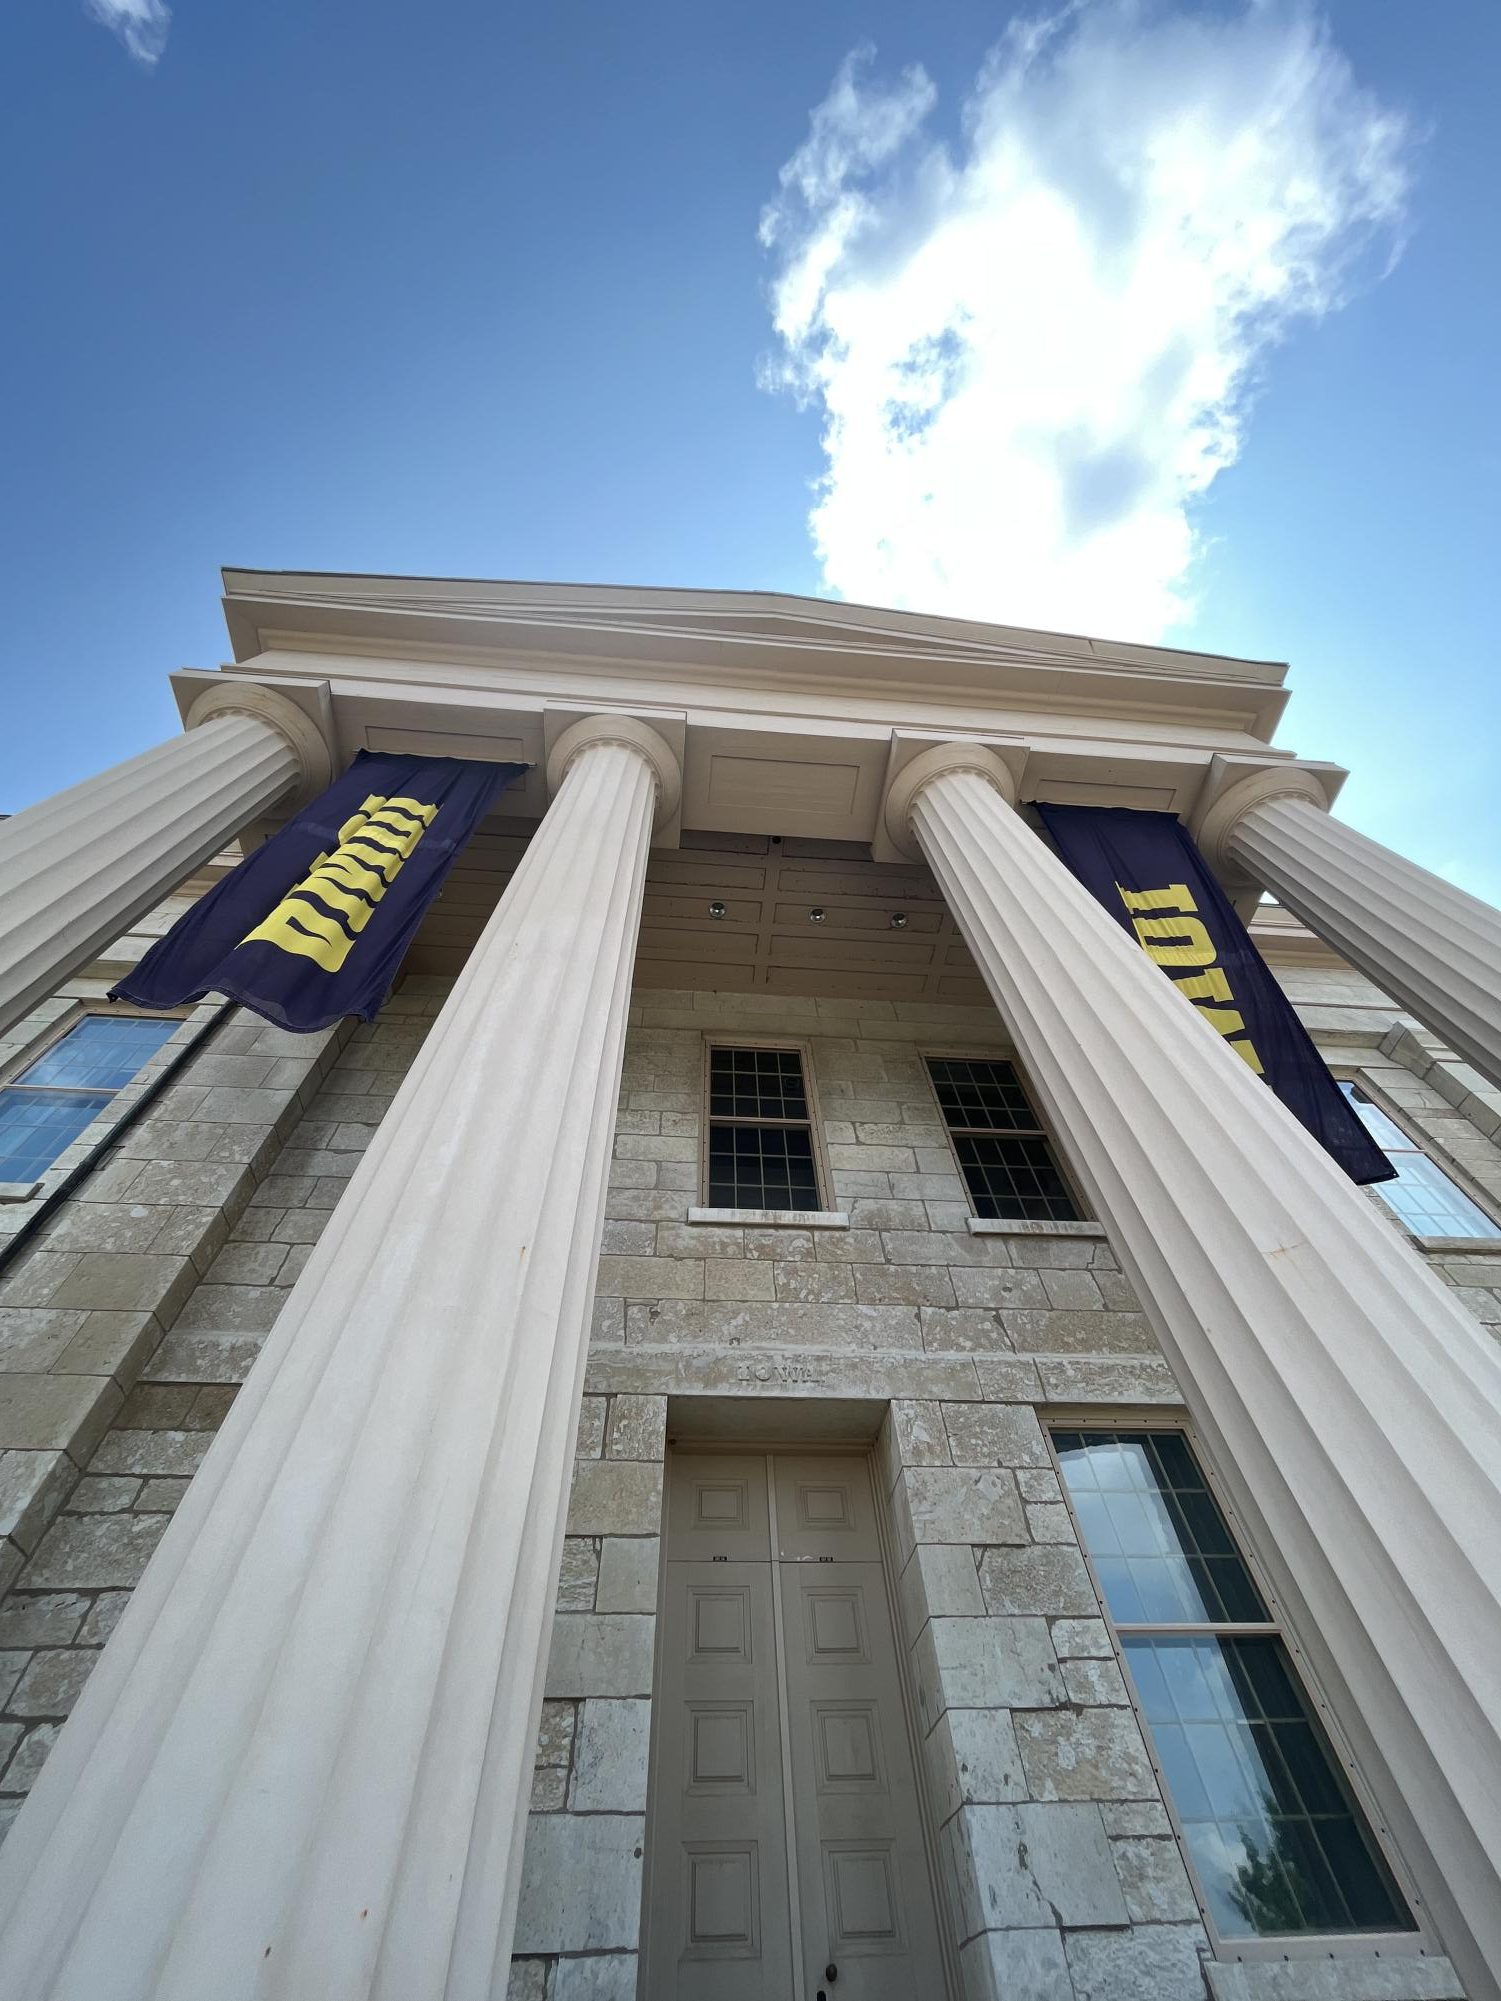 On the Old Capitol, located within the University of Iowas campus, banners with the college logo are hung from the pillars on the front of the building.